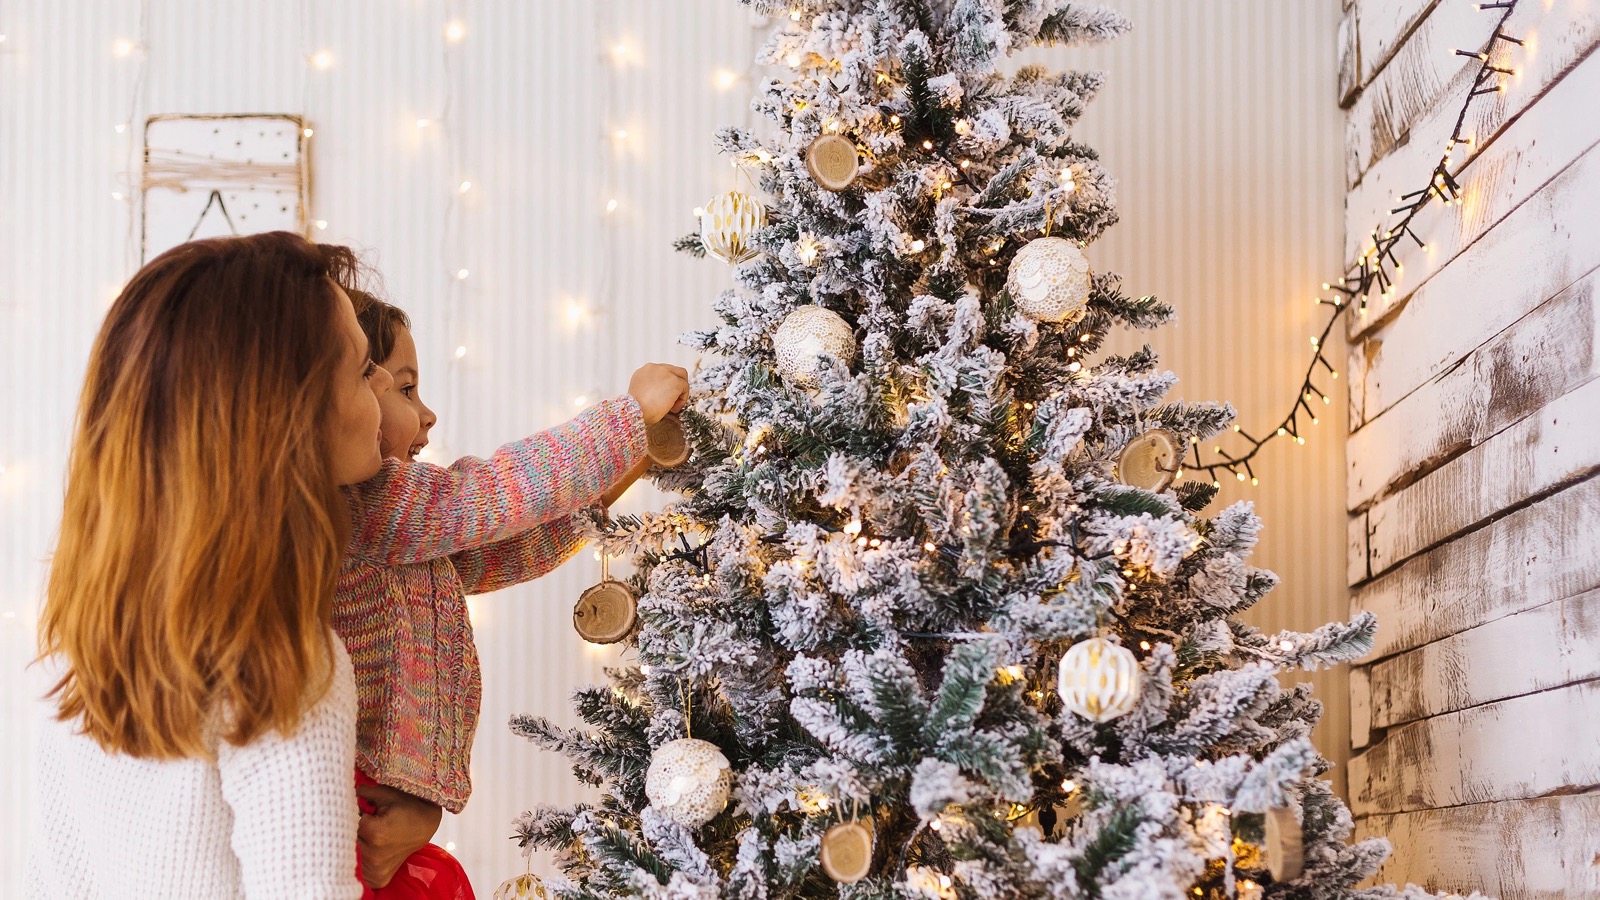 What Christmas Dessert Are You? Quiz Decorating Christmas tree